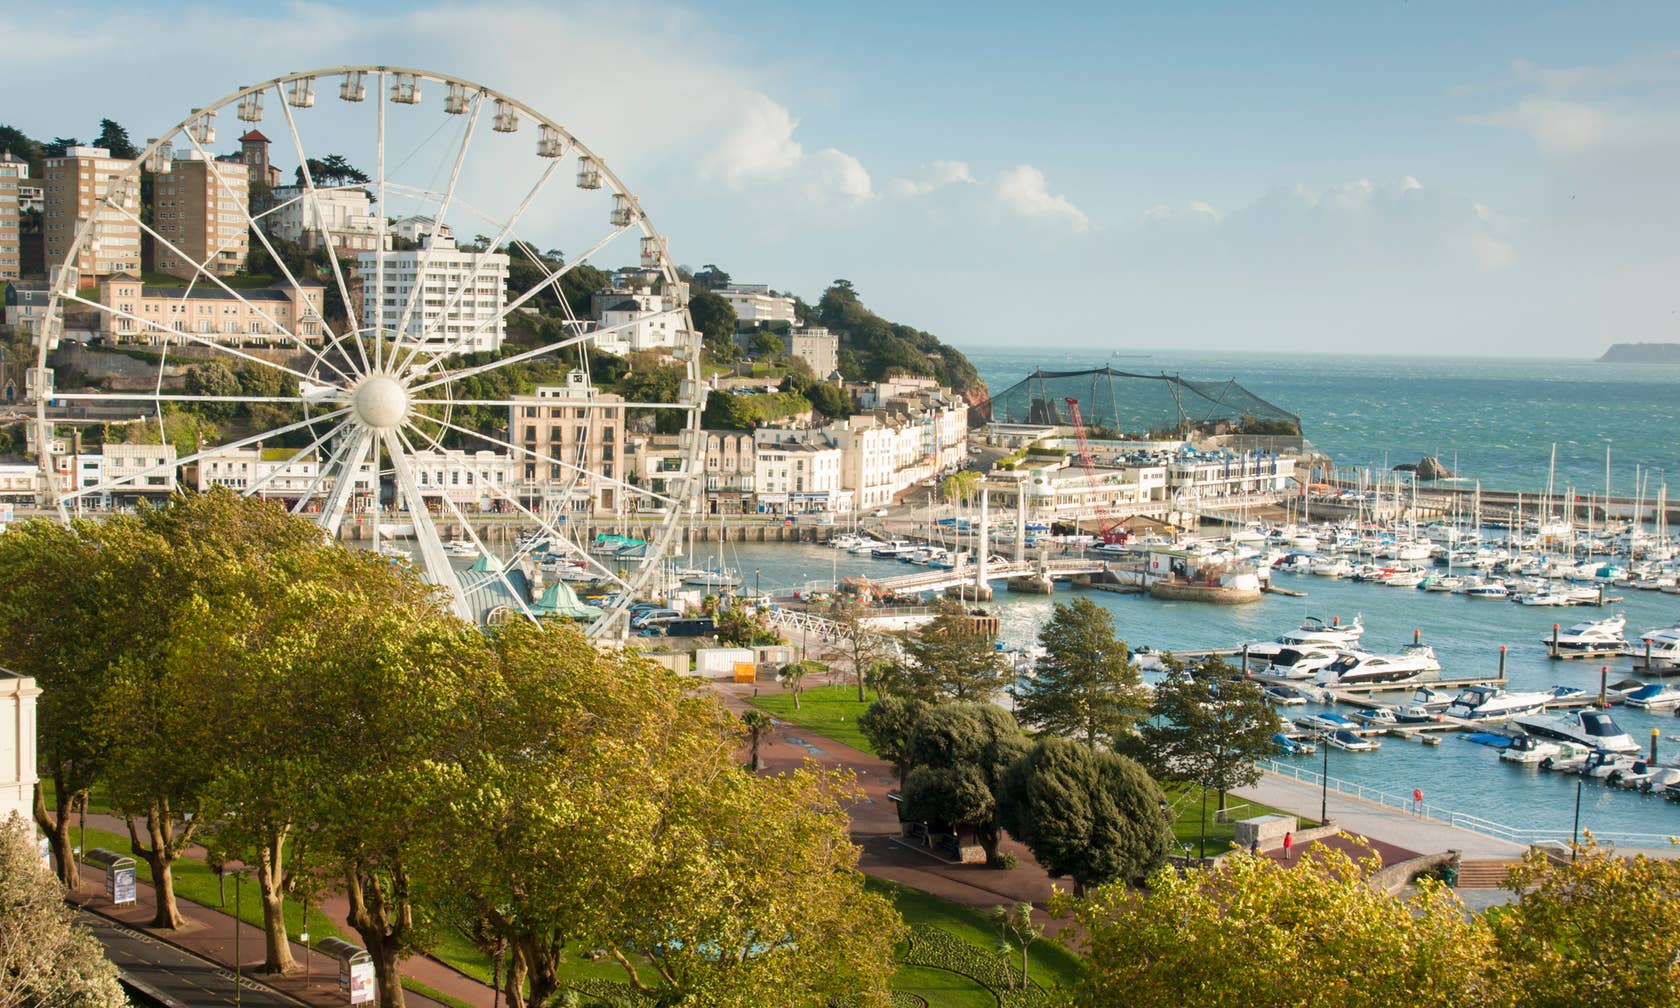 Holiday cottages in Torquay